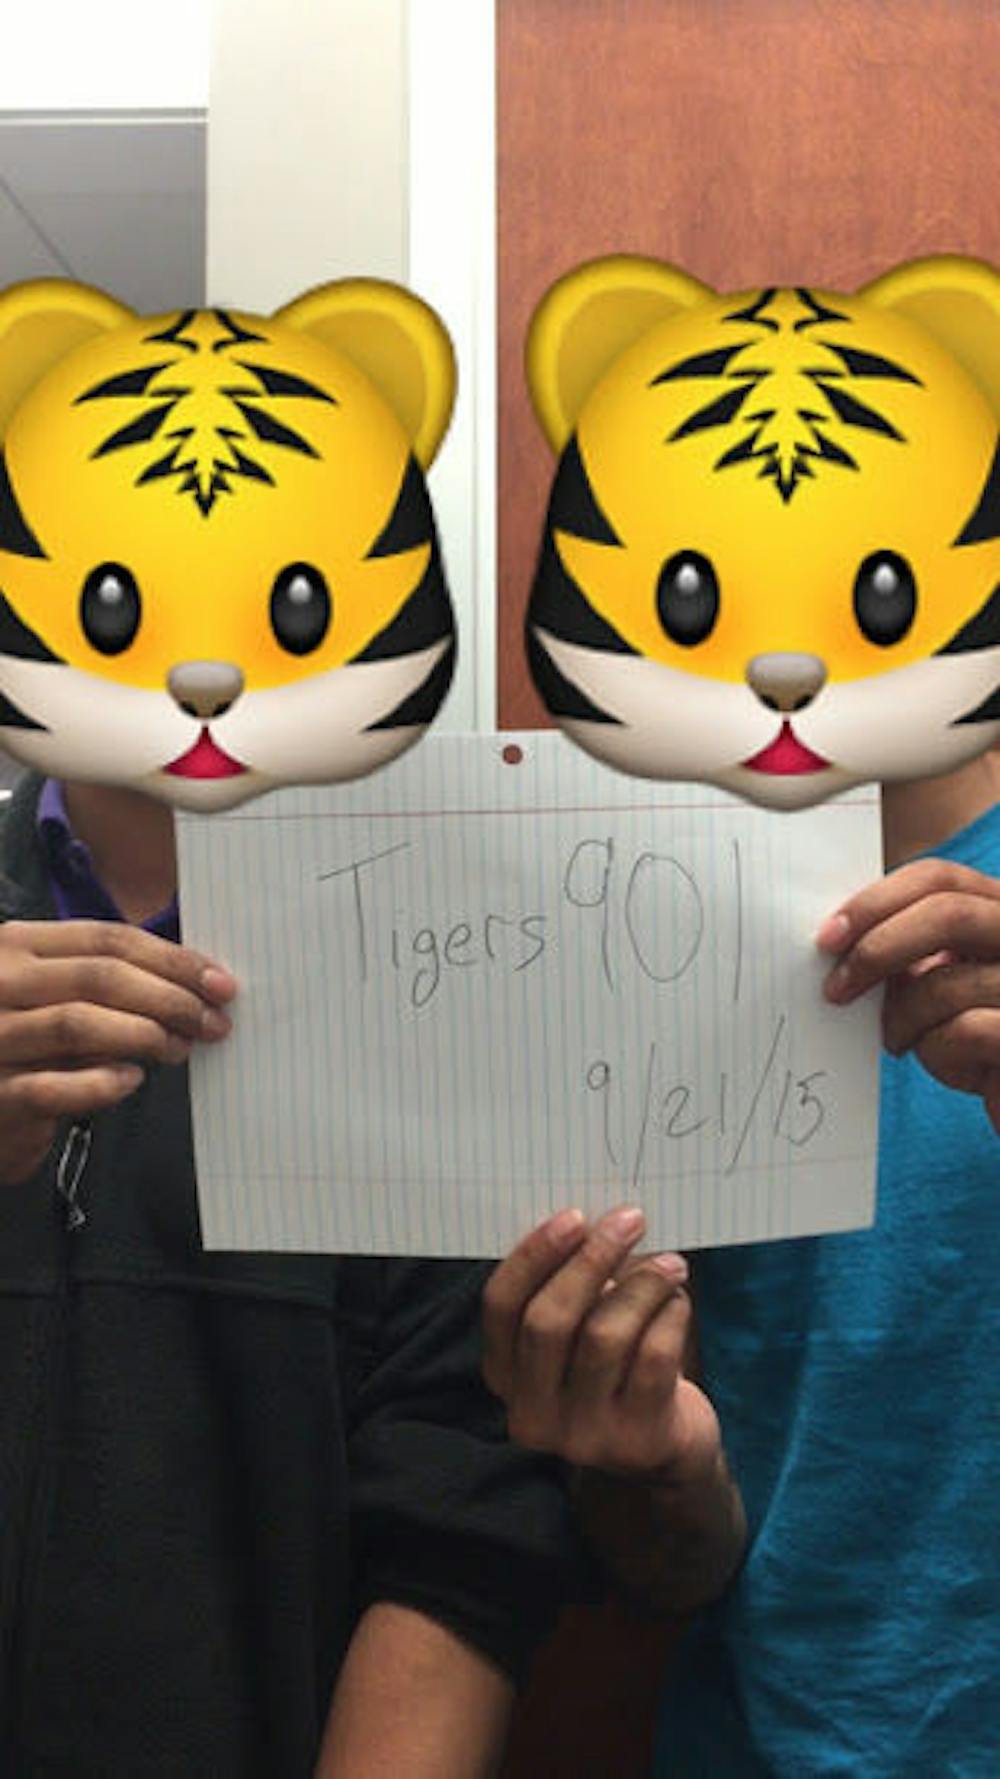 <p>The creators of Tigers901 snapchat page pose anonymously.</p>